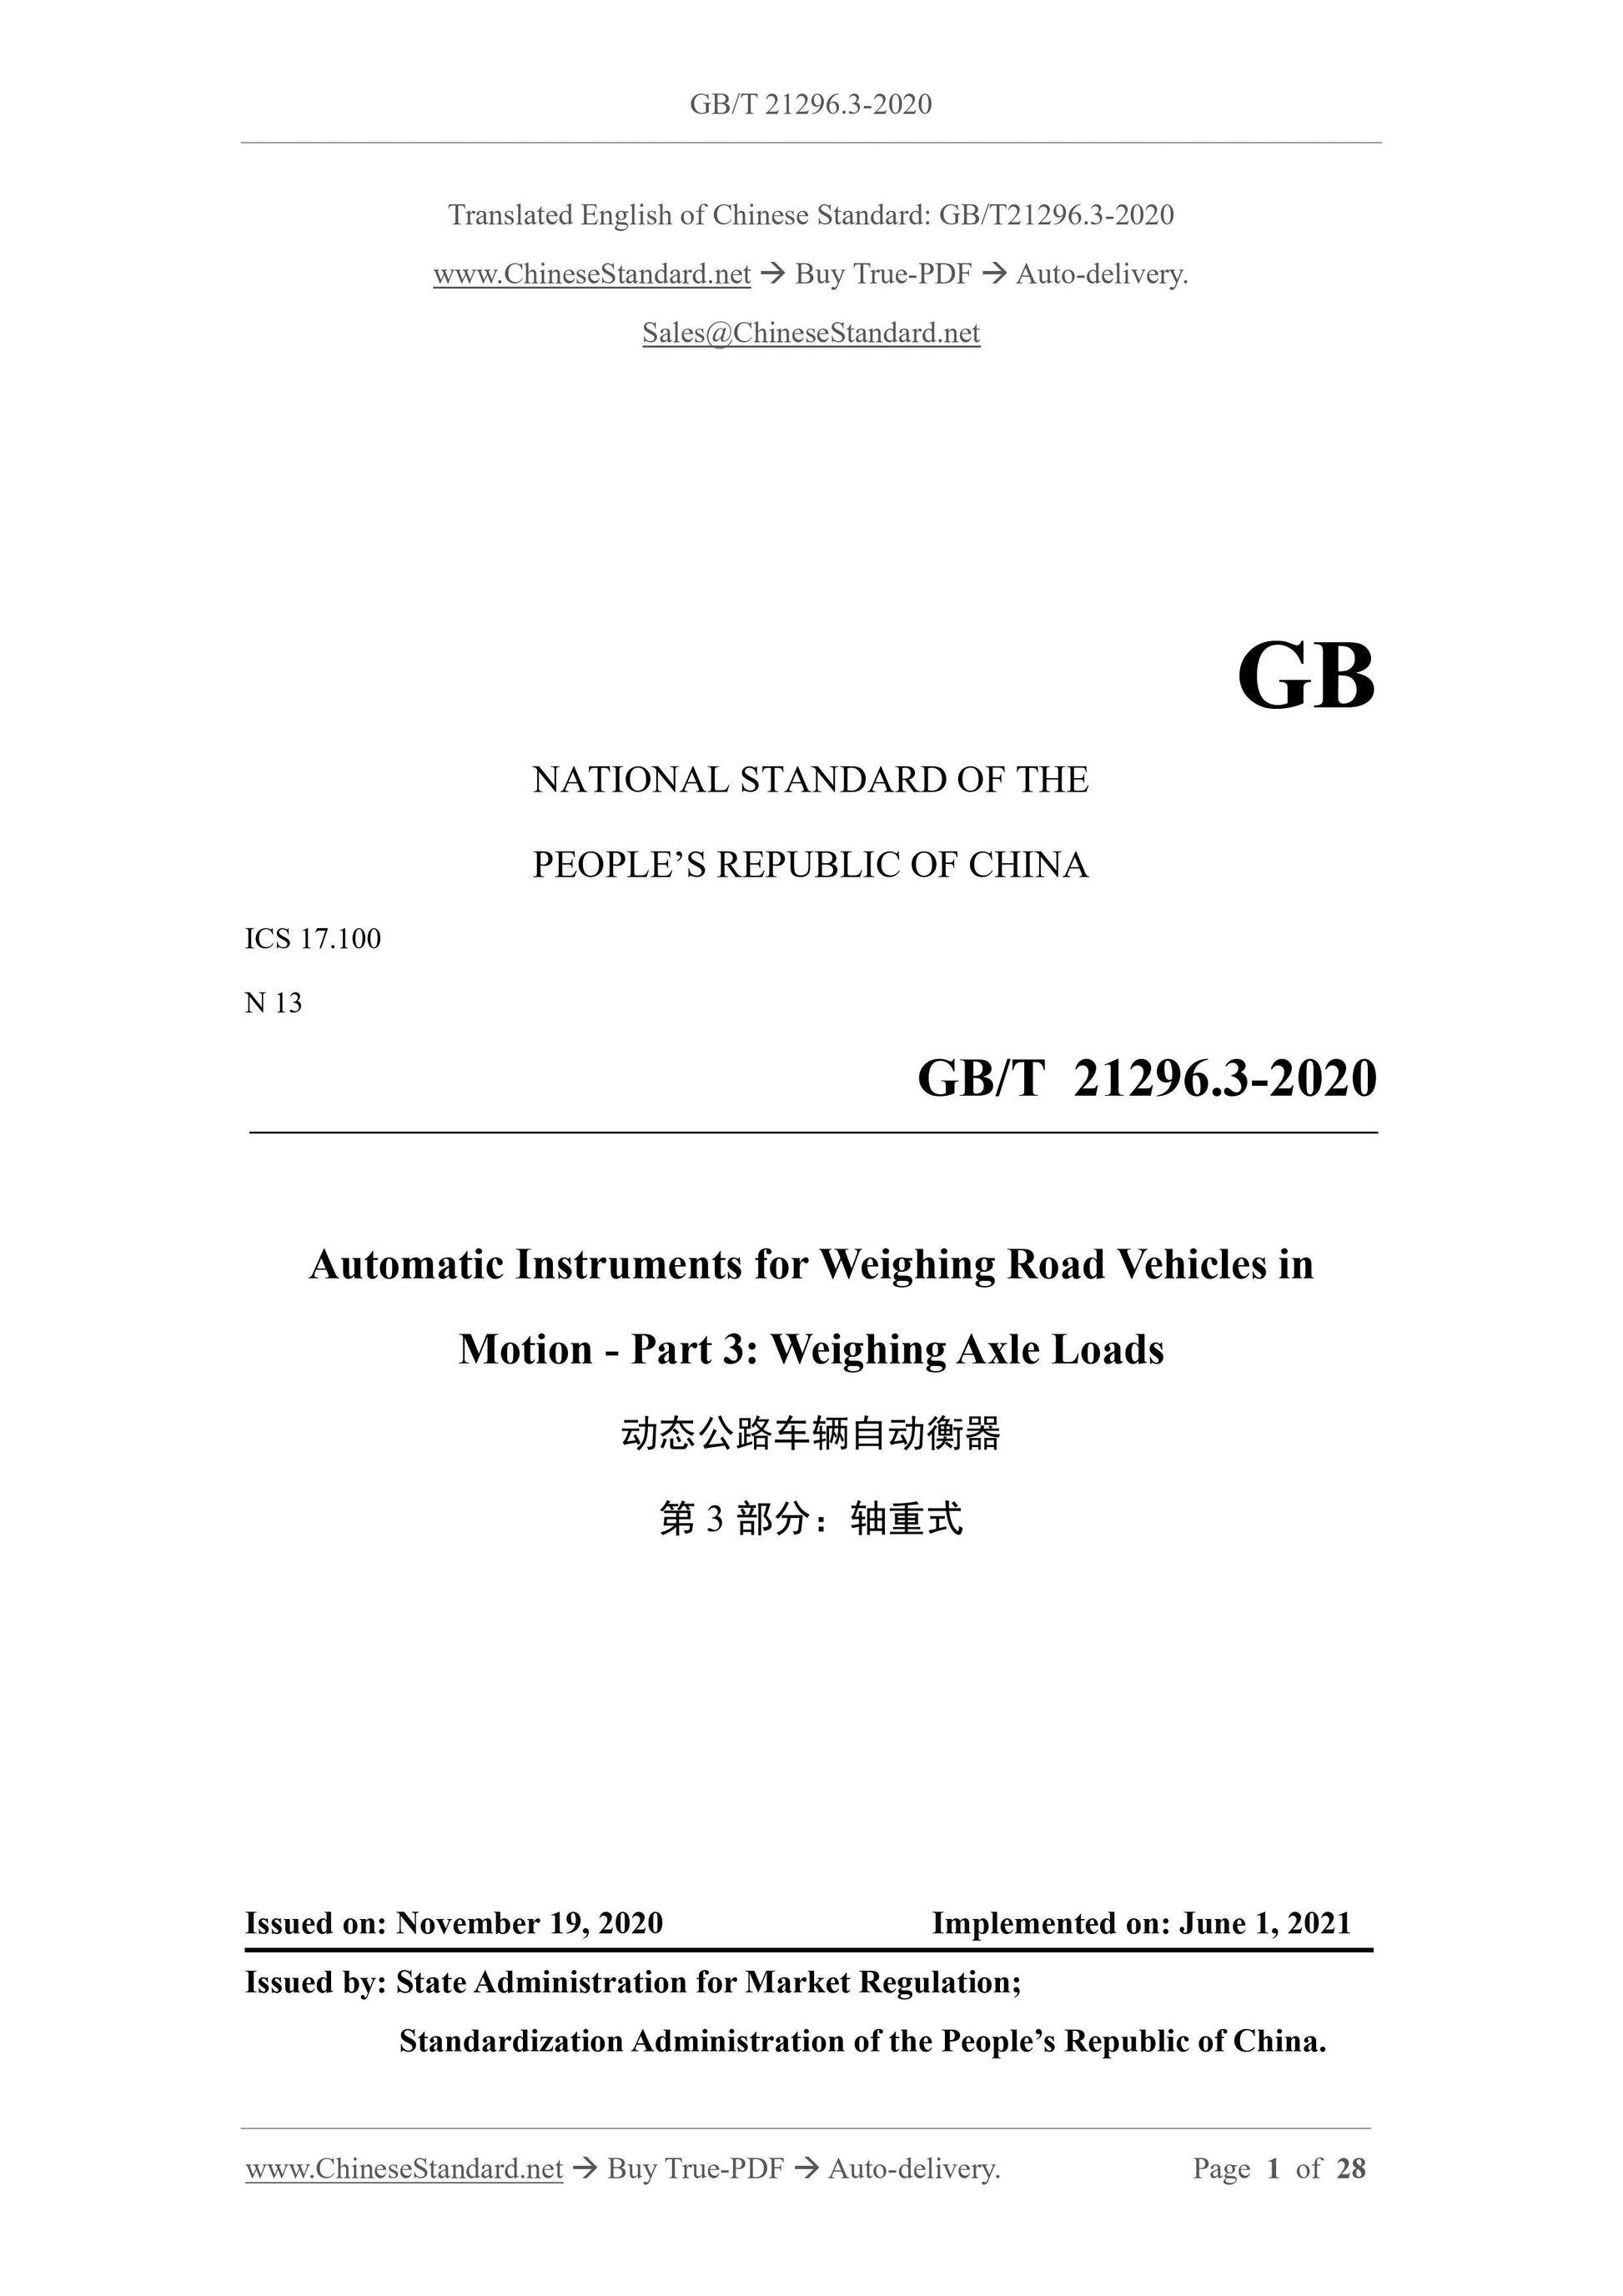 GB/T 21296.3-2020 Page 1